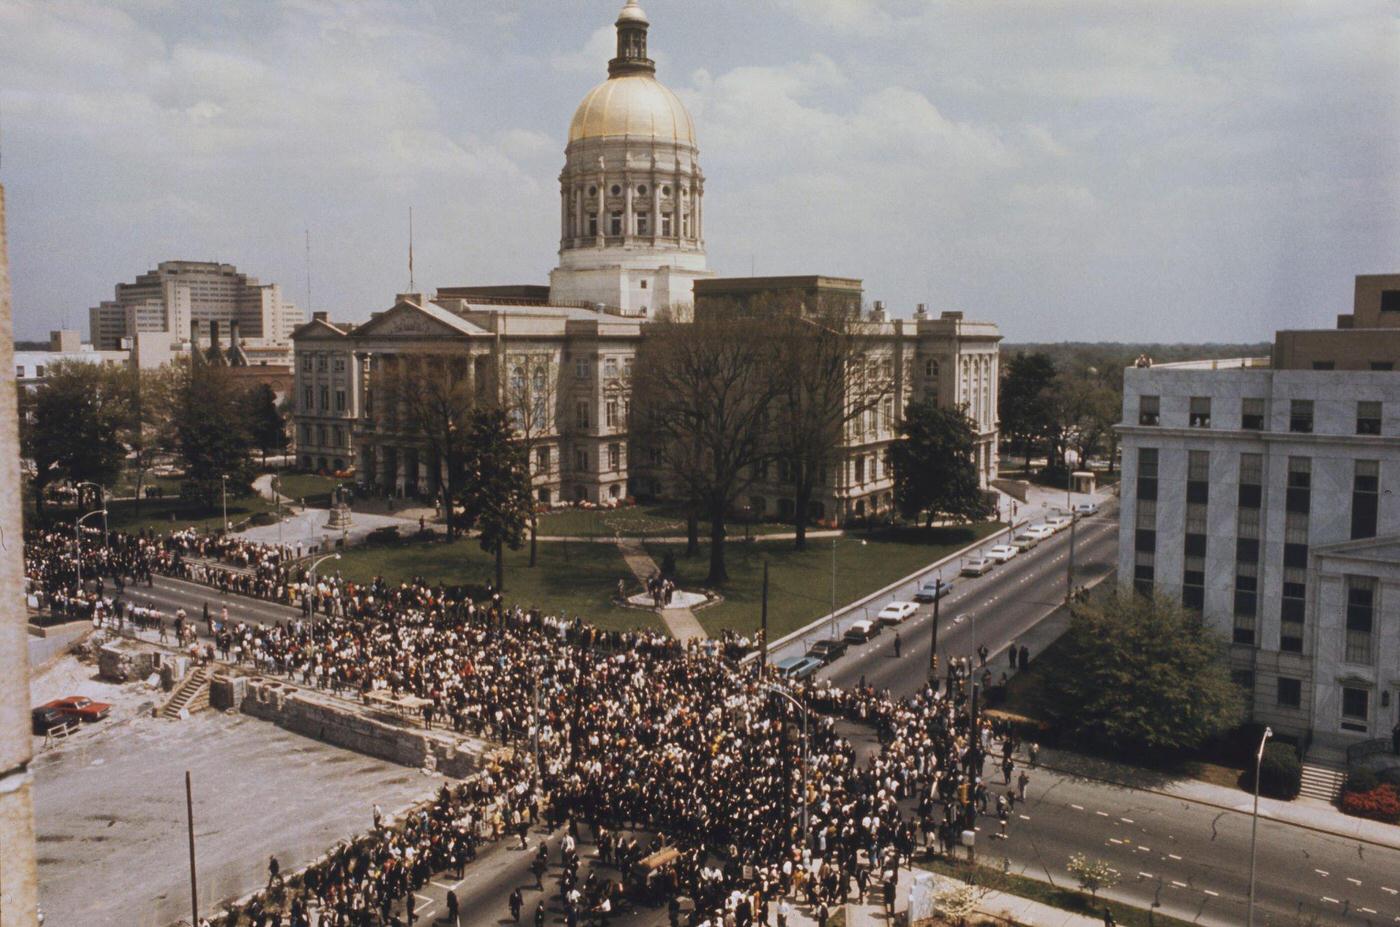 Funeral of assasinated American minister and civil rights leader, Martin Luther King with mourners following the funeral wagon carrying the casket past the state capitol building in Atlanta, Georgia on 9th April 1968.